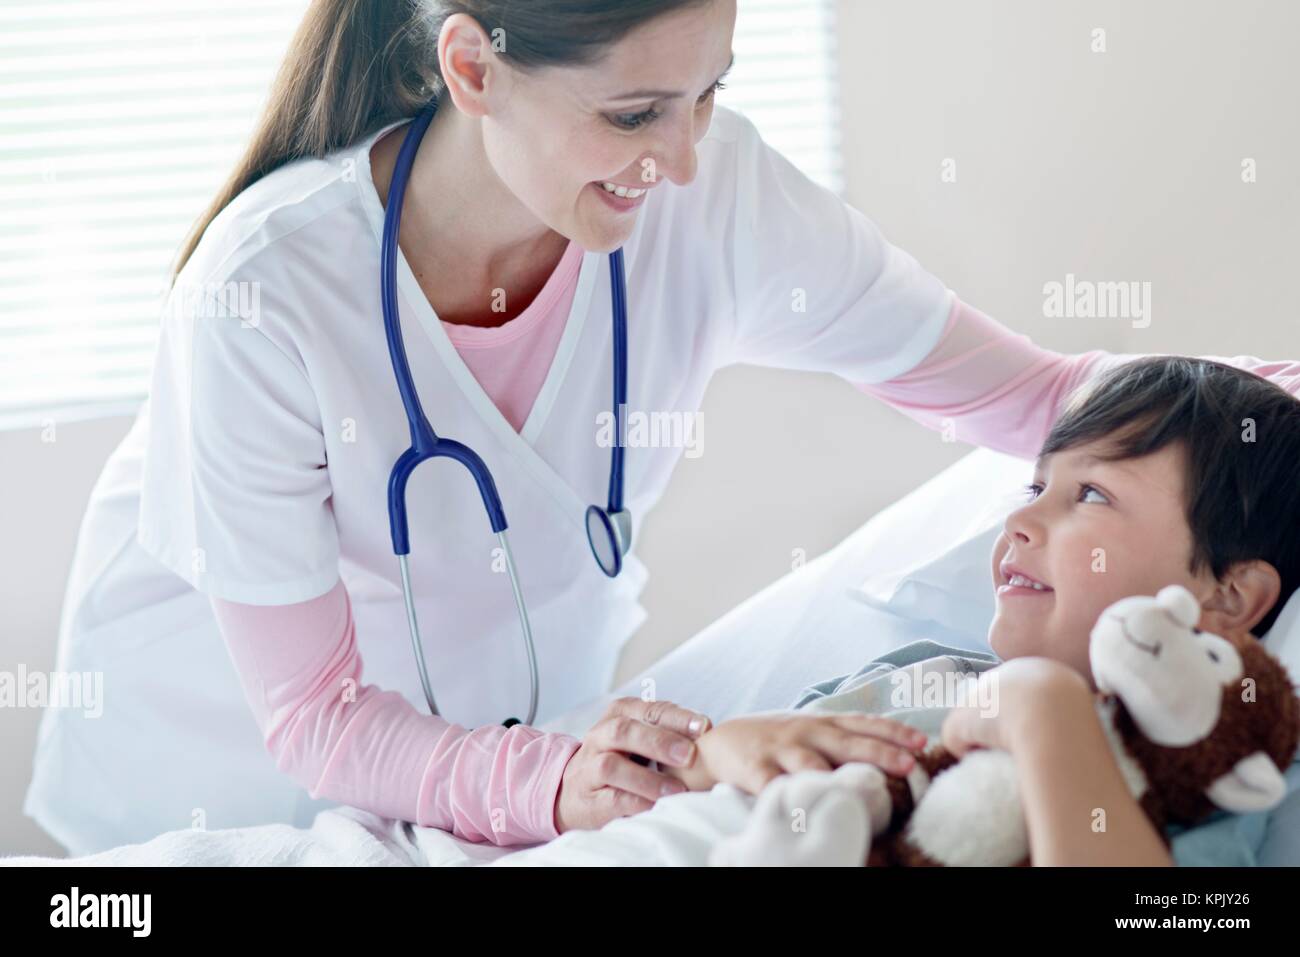 Young boy in hospital bed smiling towards female nurse. Stock Photo